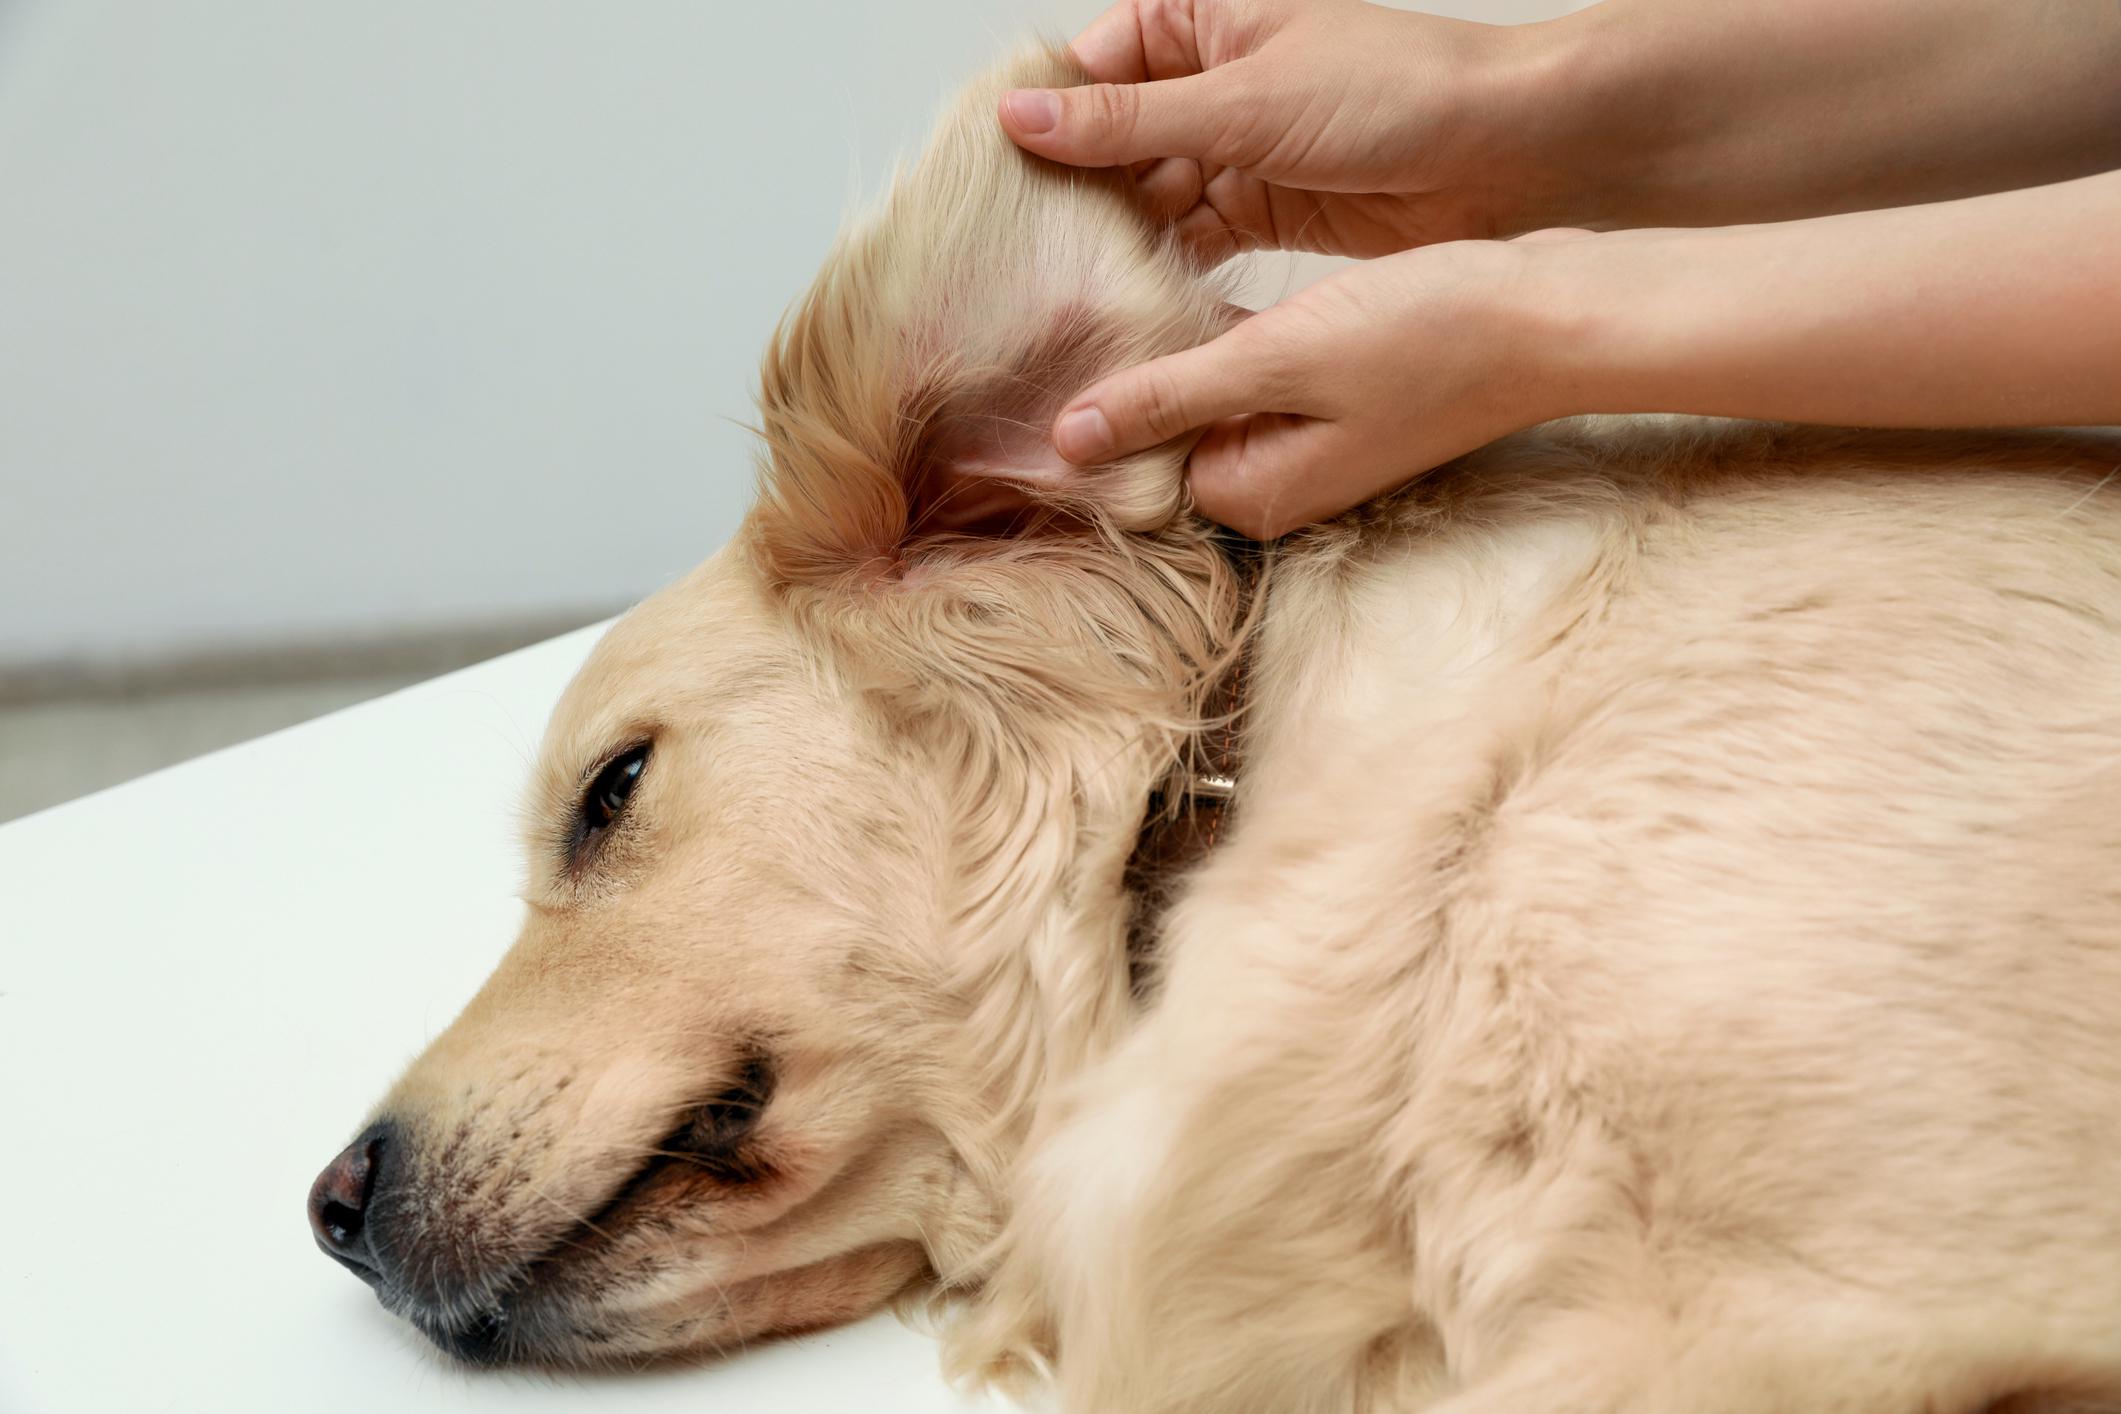 Common Types of Ticks That Could Be on Your Dog